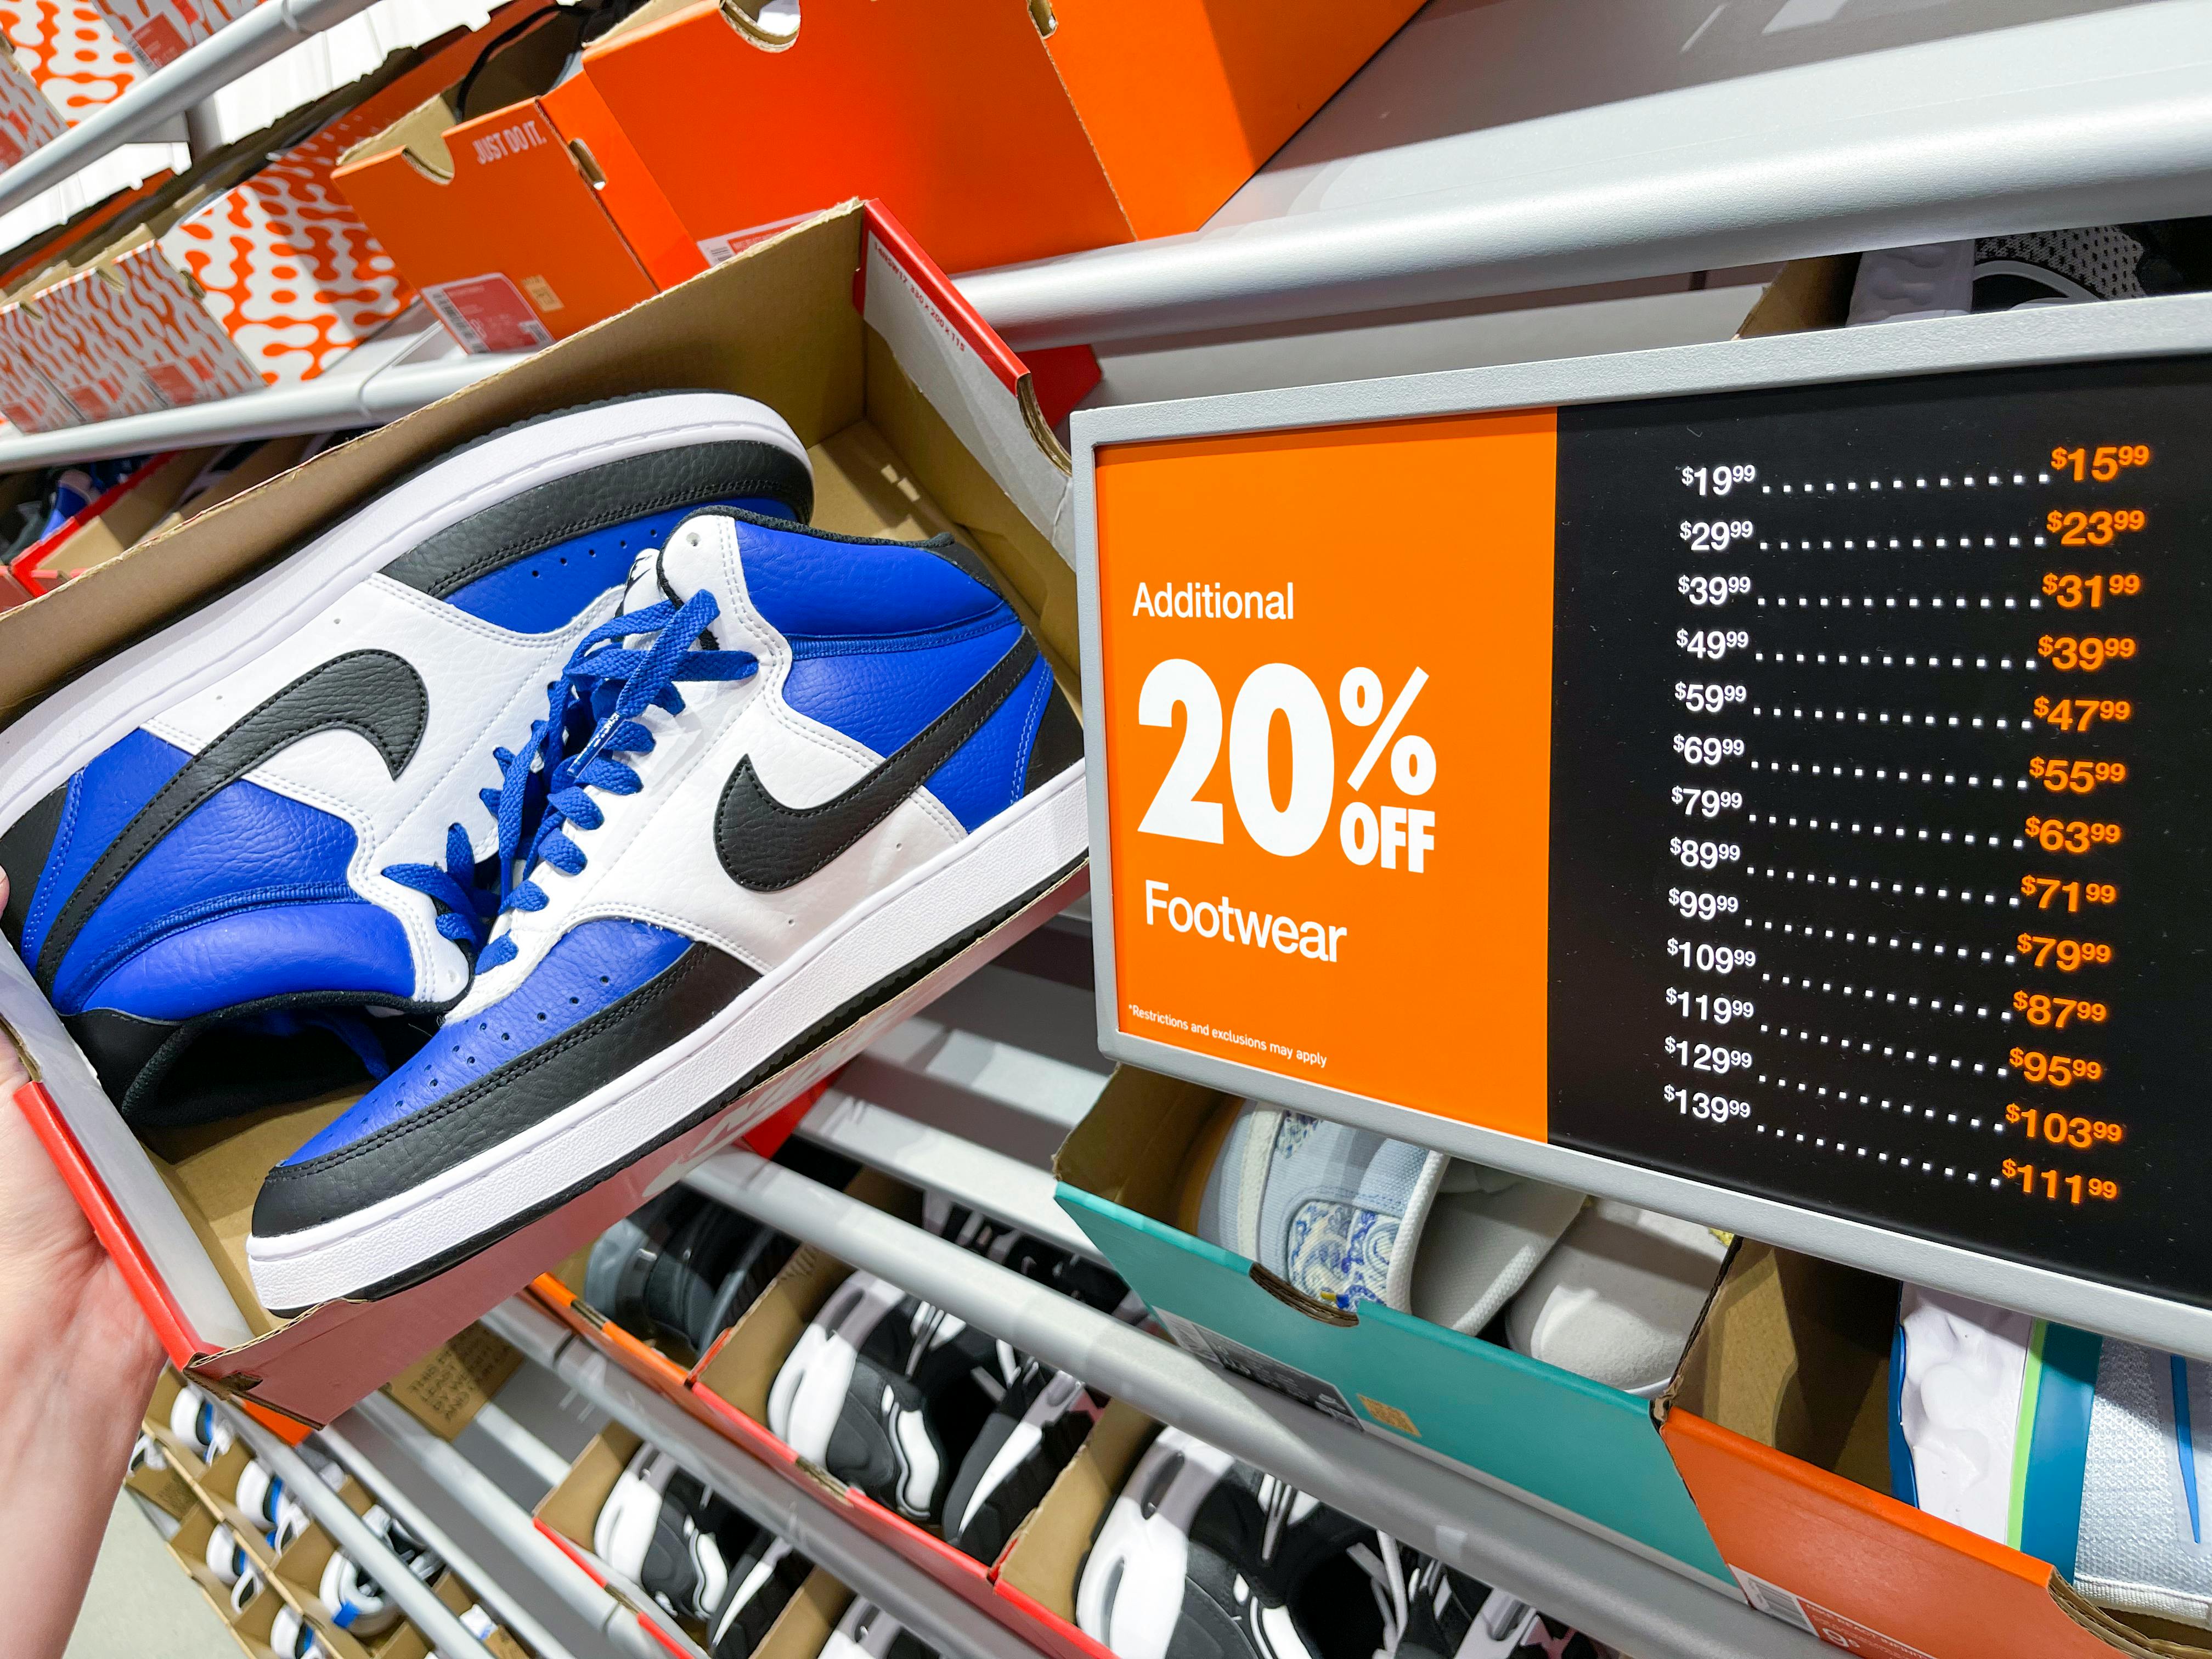 Factory Outlet Sale Tips to Help You on Kicks - Krazy Coupon Lady